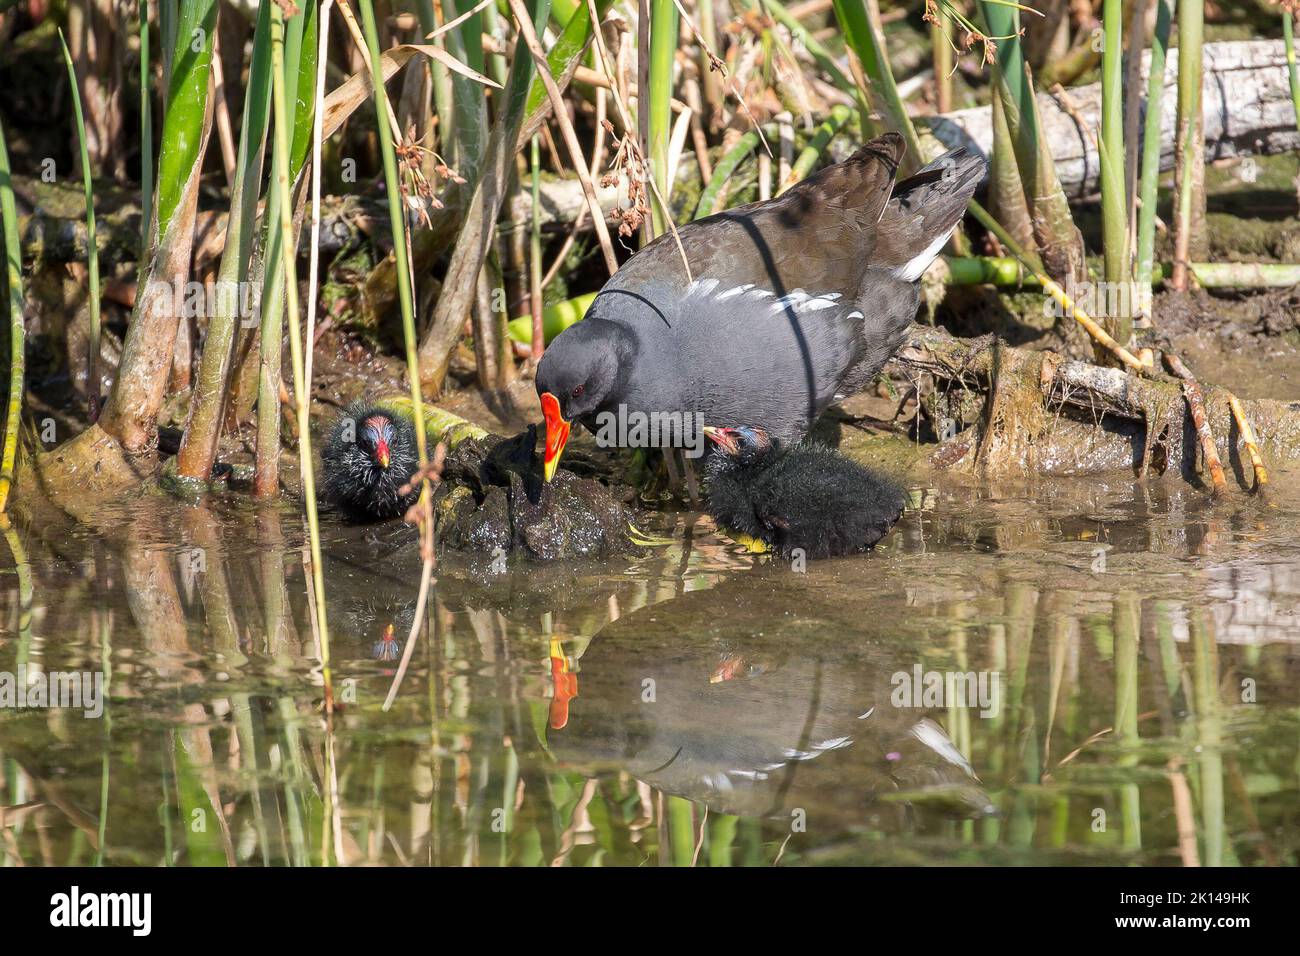 Wild, UK moorhen bird (Gallinula chloroplasts) with two baby chicks at water's edge, clear reflection in water. Stock Photo